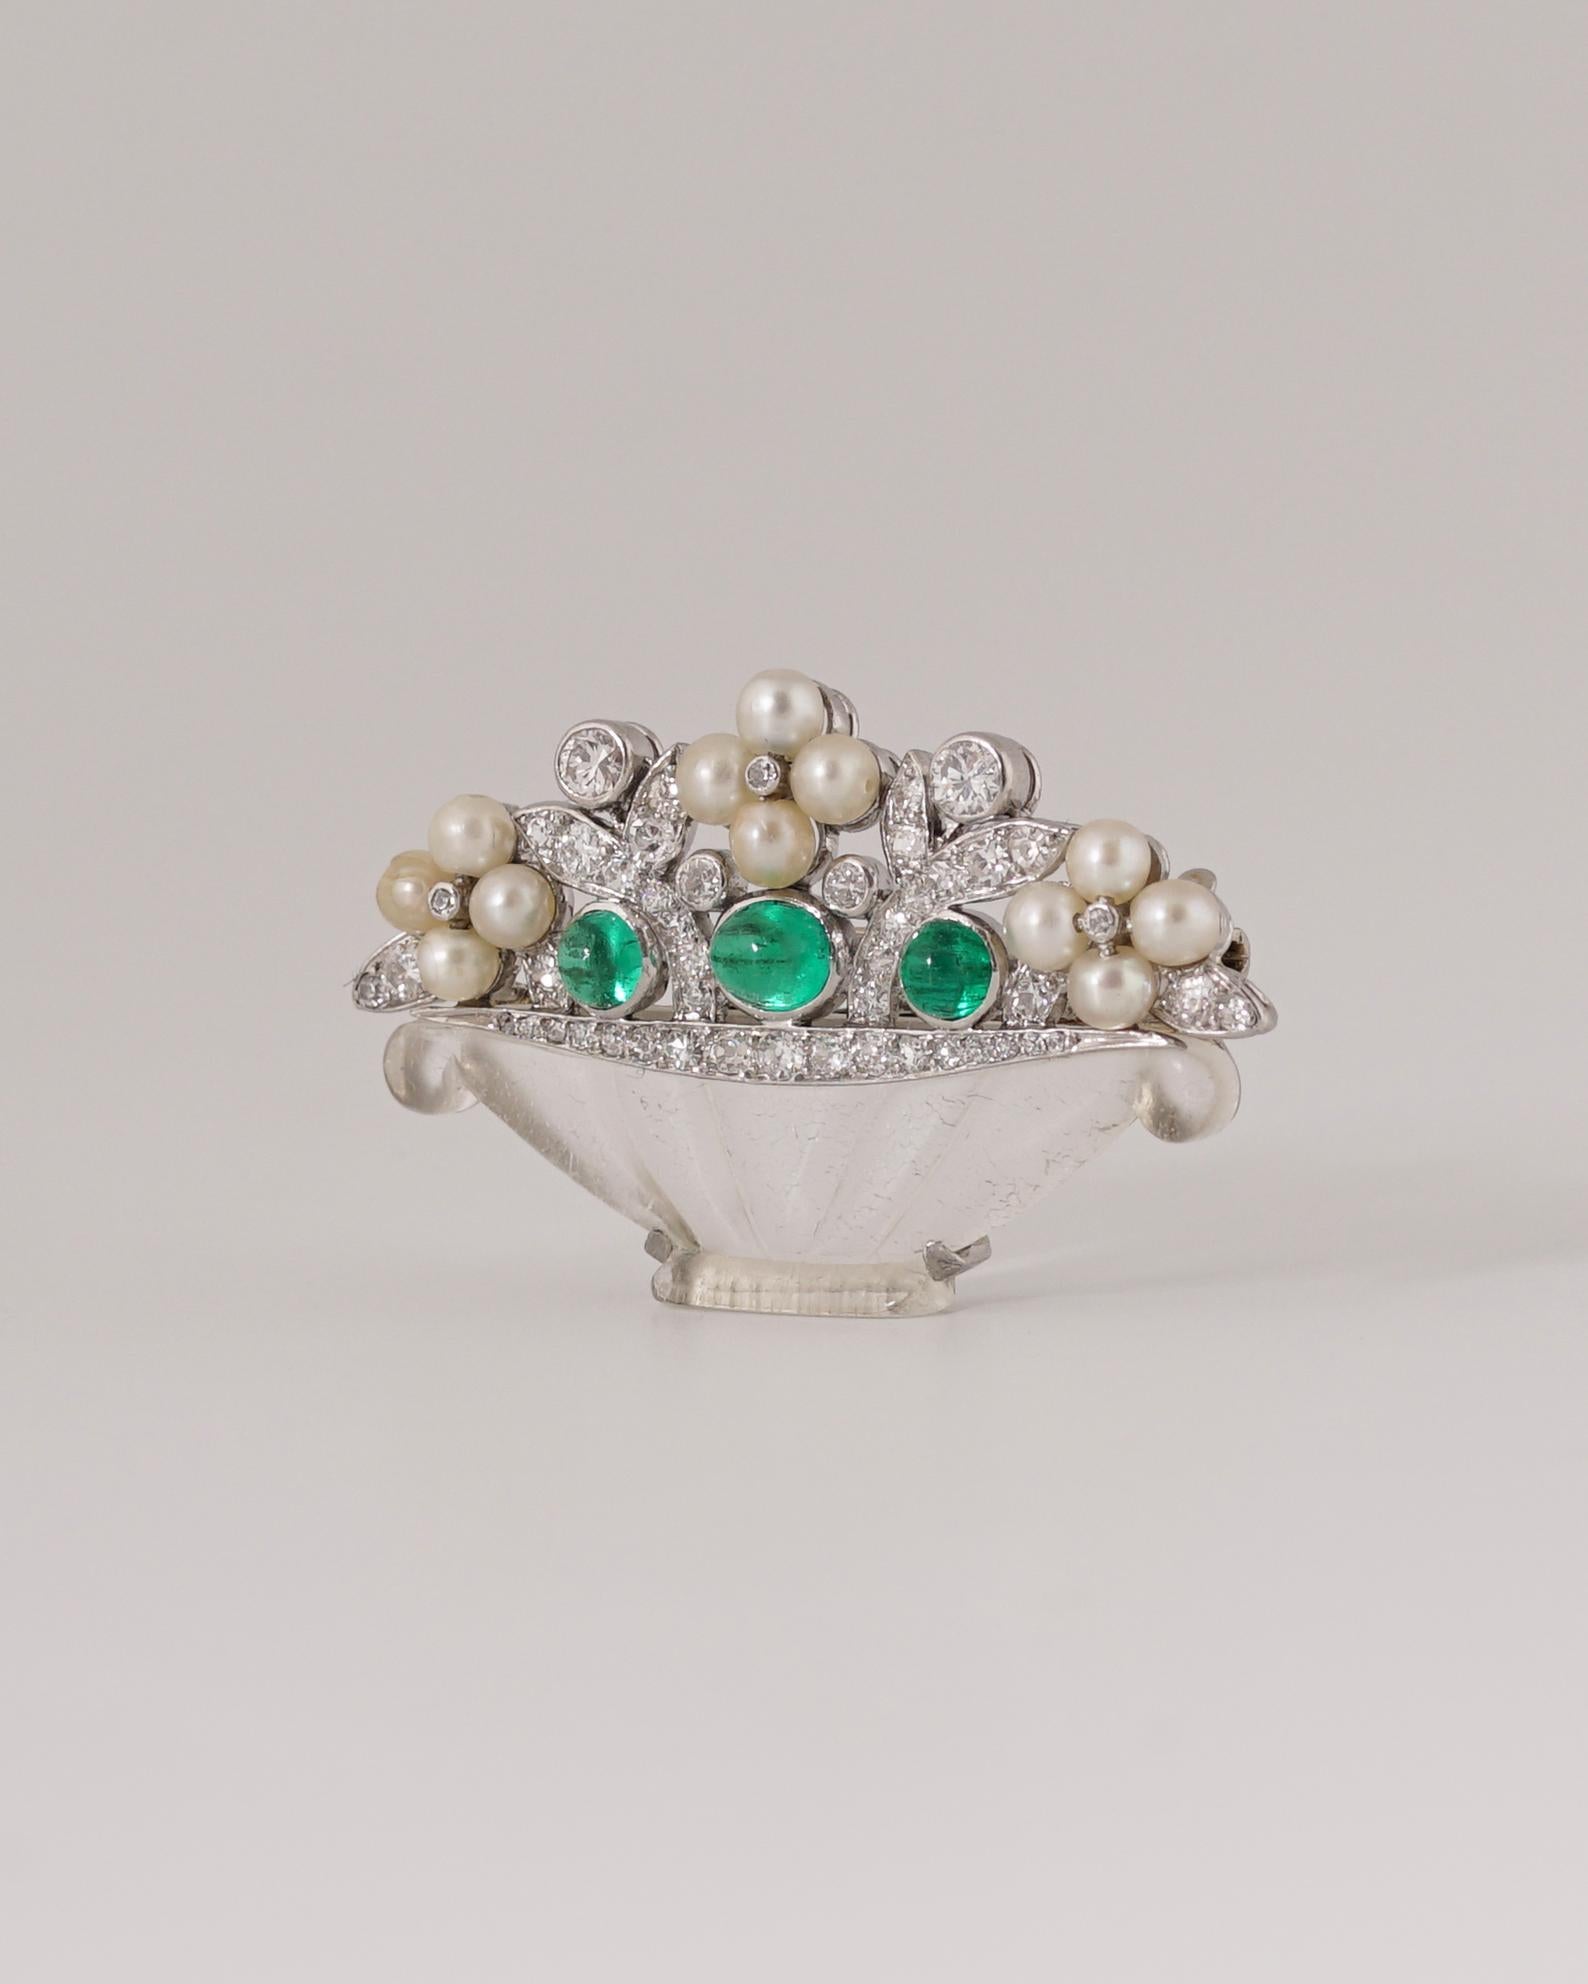 Express Shipping still available during Lockdown

Cartier
Flower Basket Brooch, Circa 1925.
Three Cabochon Emeralds (0,40 carat), Natural Pearls (3mm each), 47 single old European and round-cut diamonds (0,55 carats, H-J color and VS clarity),